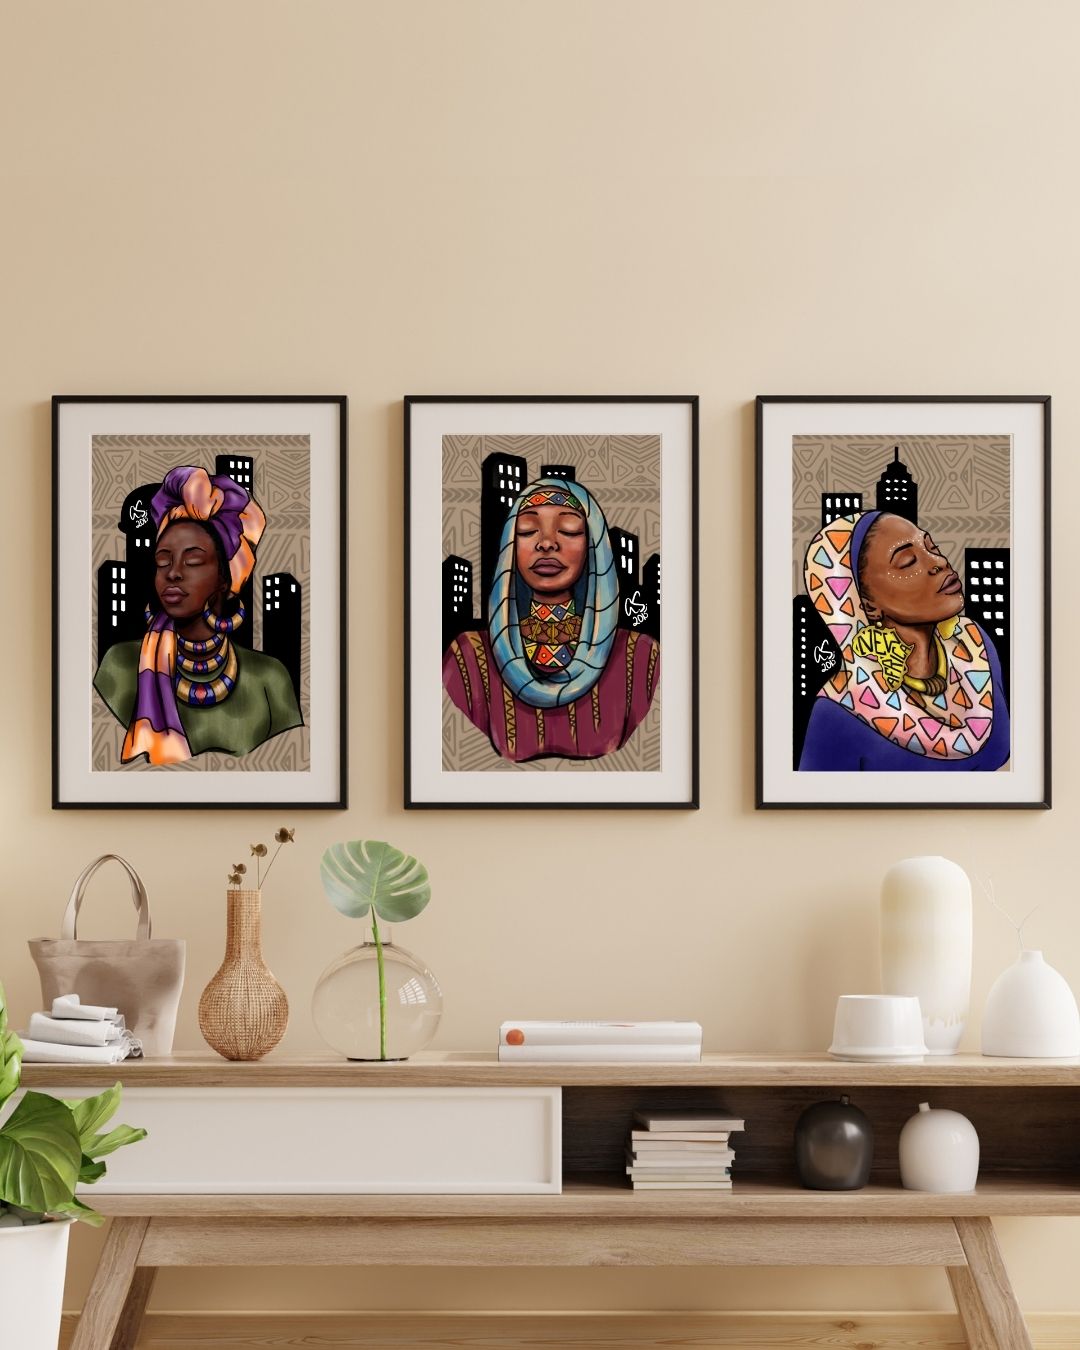 Covered Girls in The City Triptych Art Print